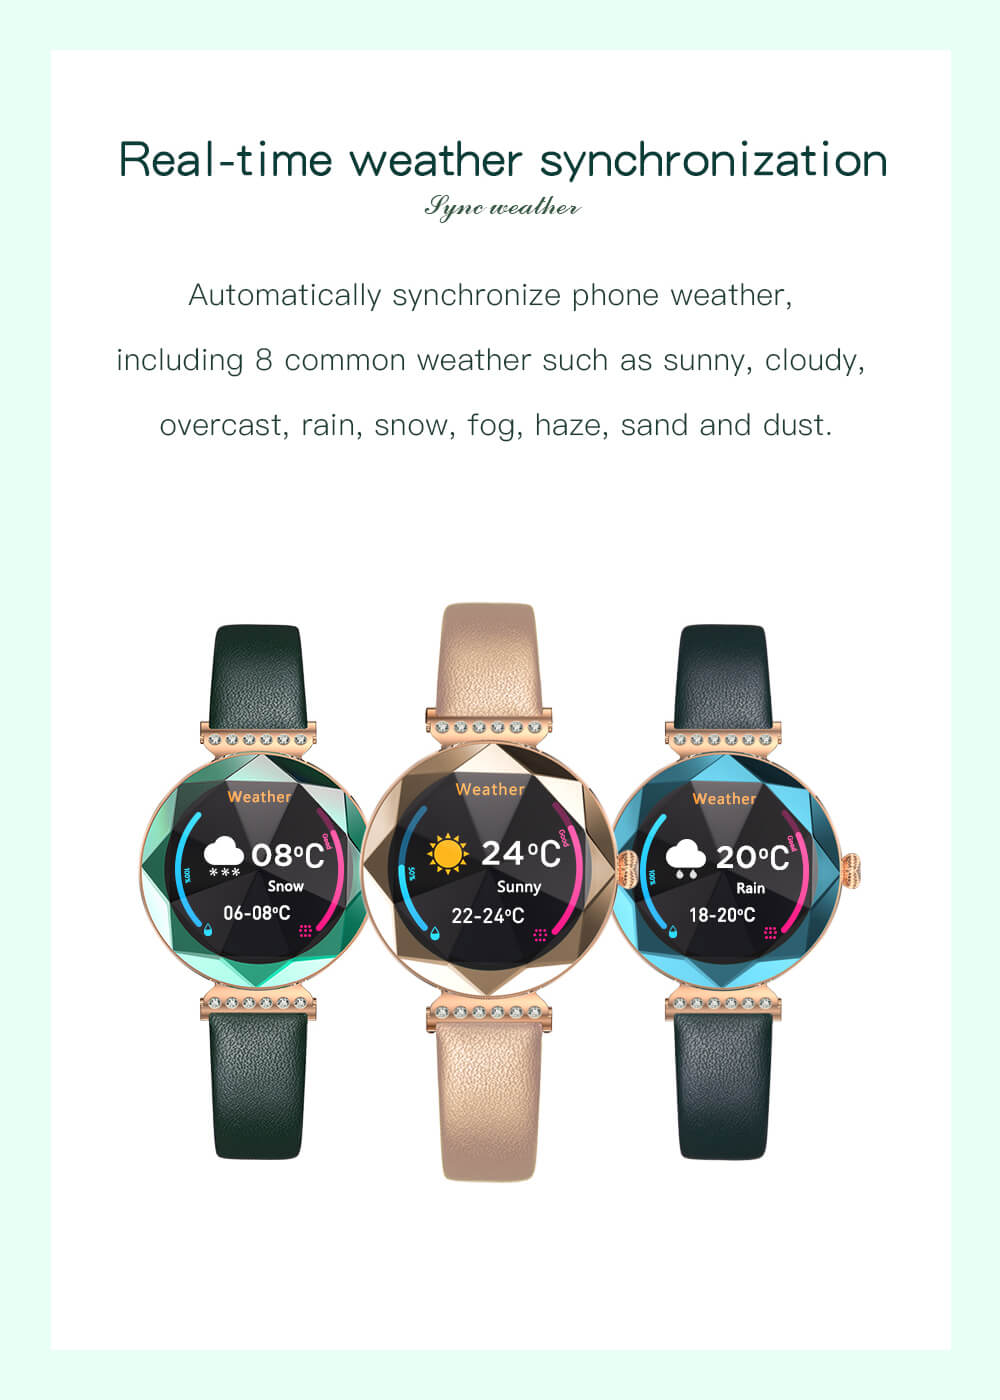 Findtime Luxury Smart Watches for Women with Real-time Heart Rate Monitoring IP68 Waterproof